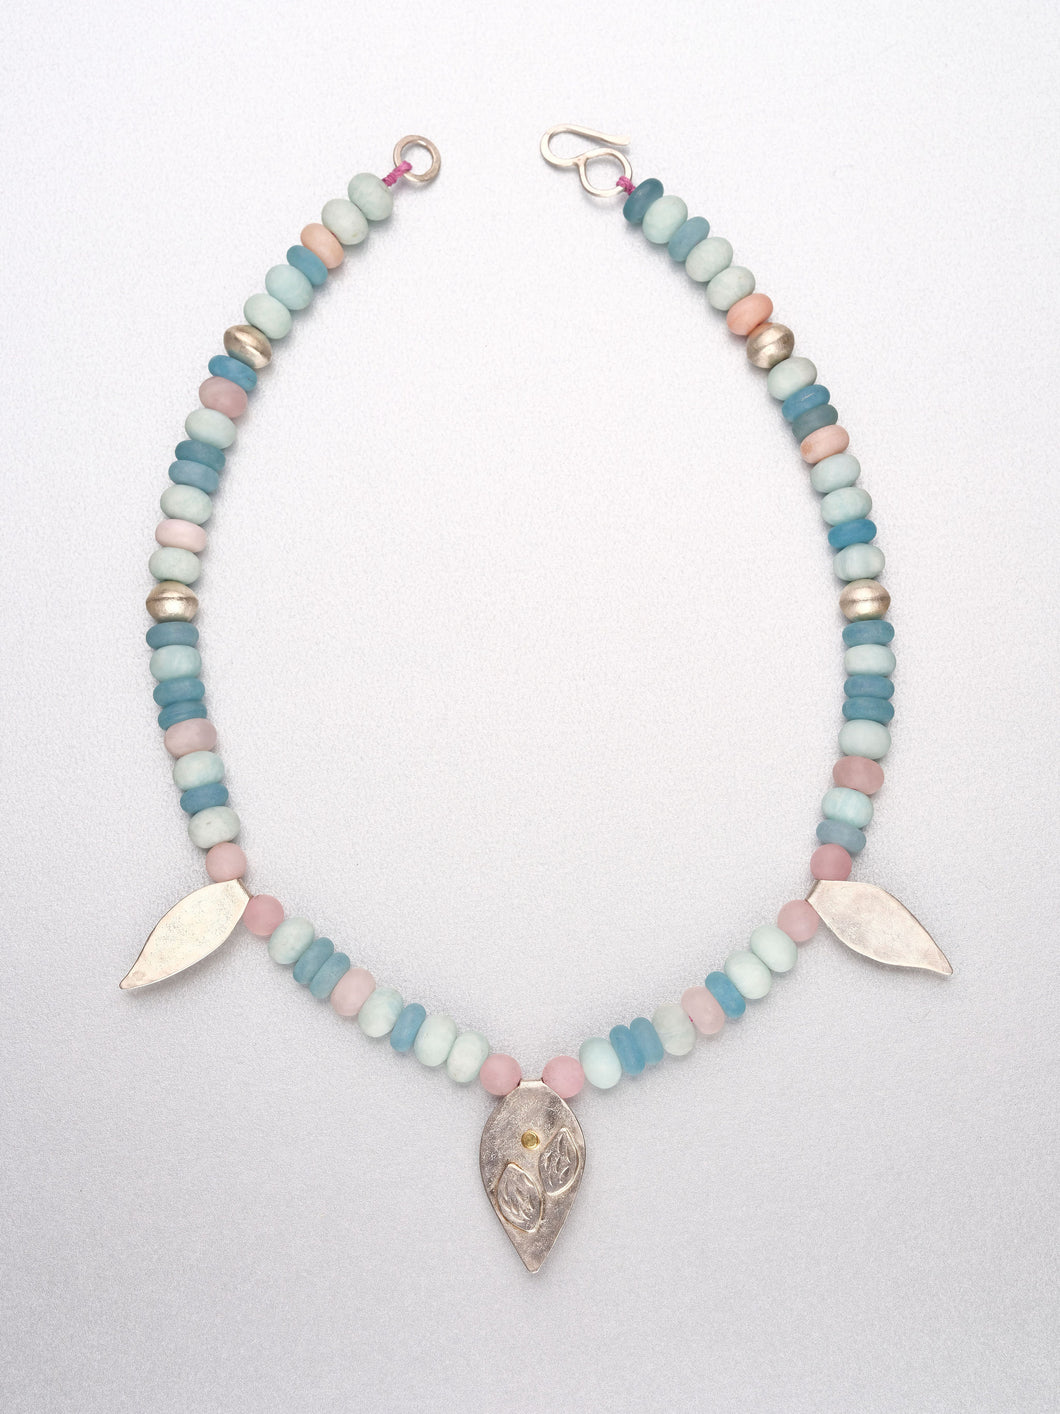 Beaded necklace with leaf pendants